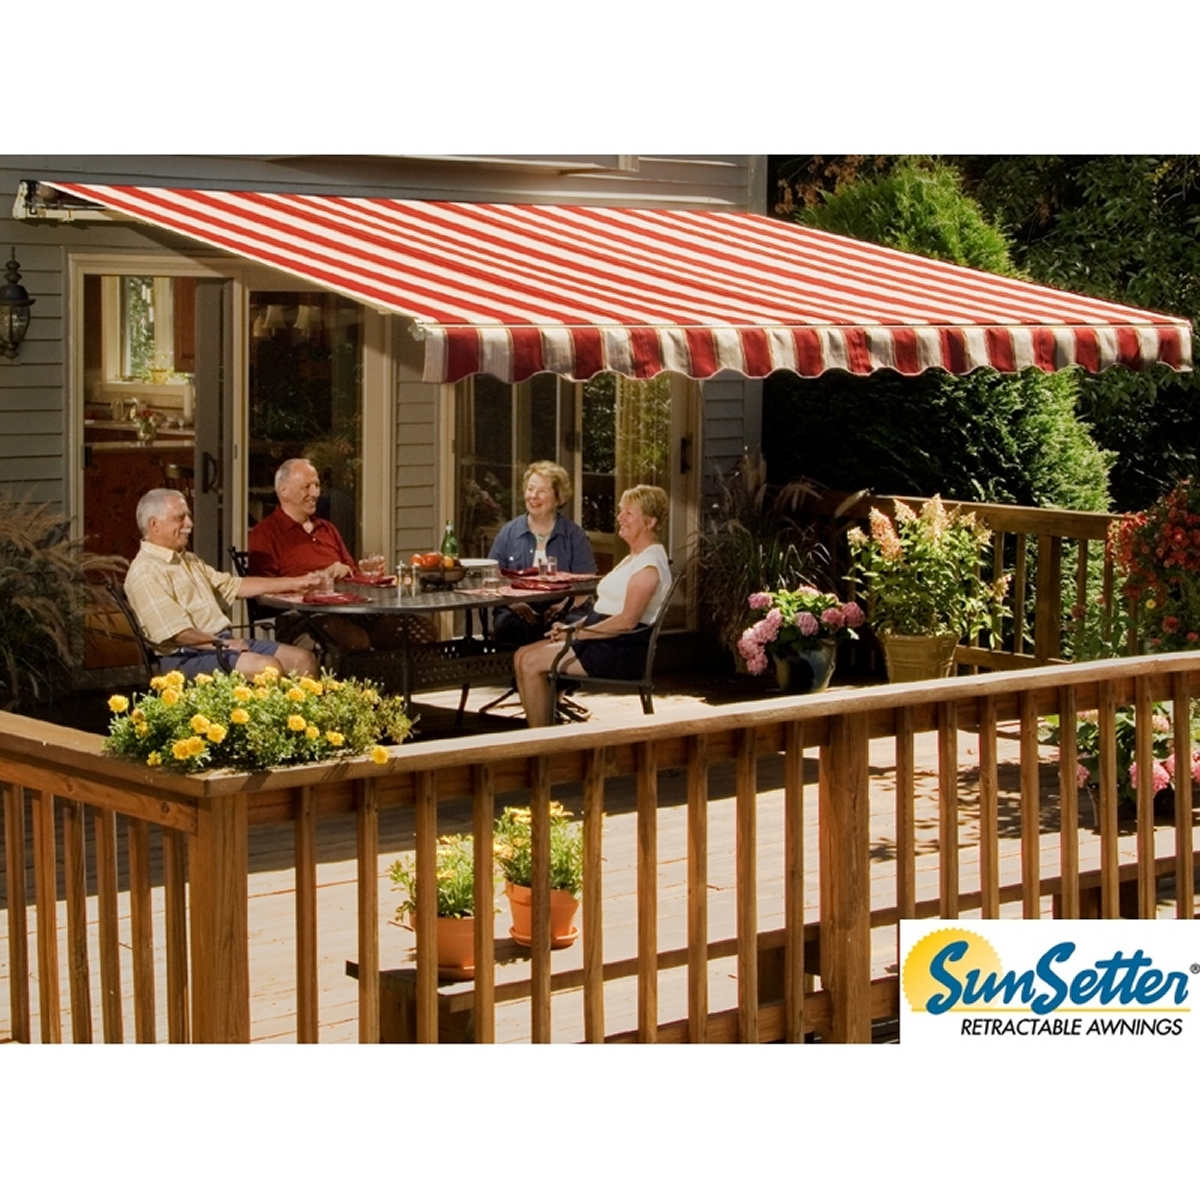 15 Motorized Xl Retractable Awning With Woven Acrylic Fabric Costco